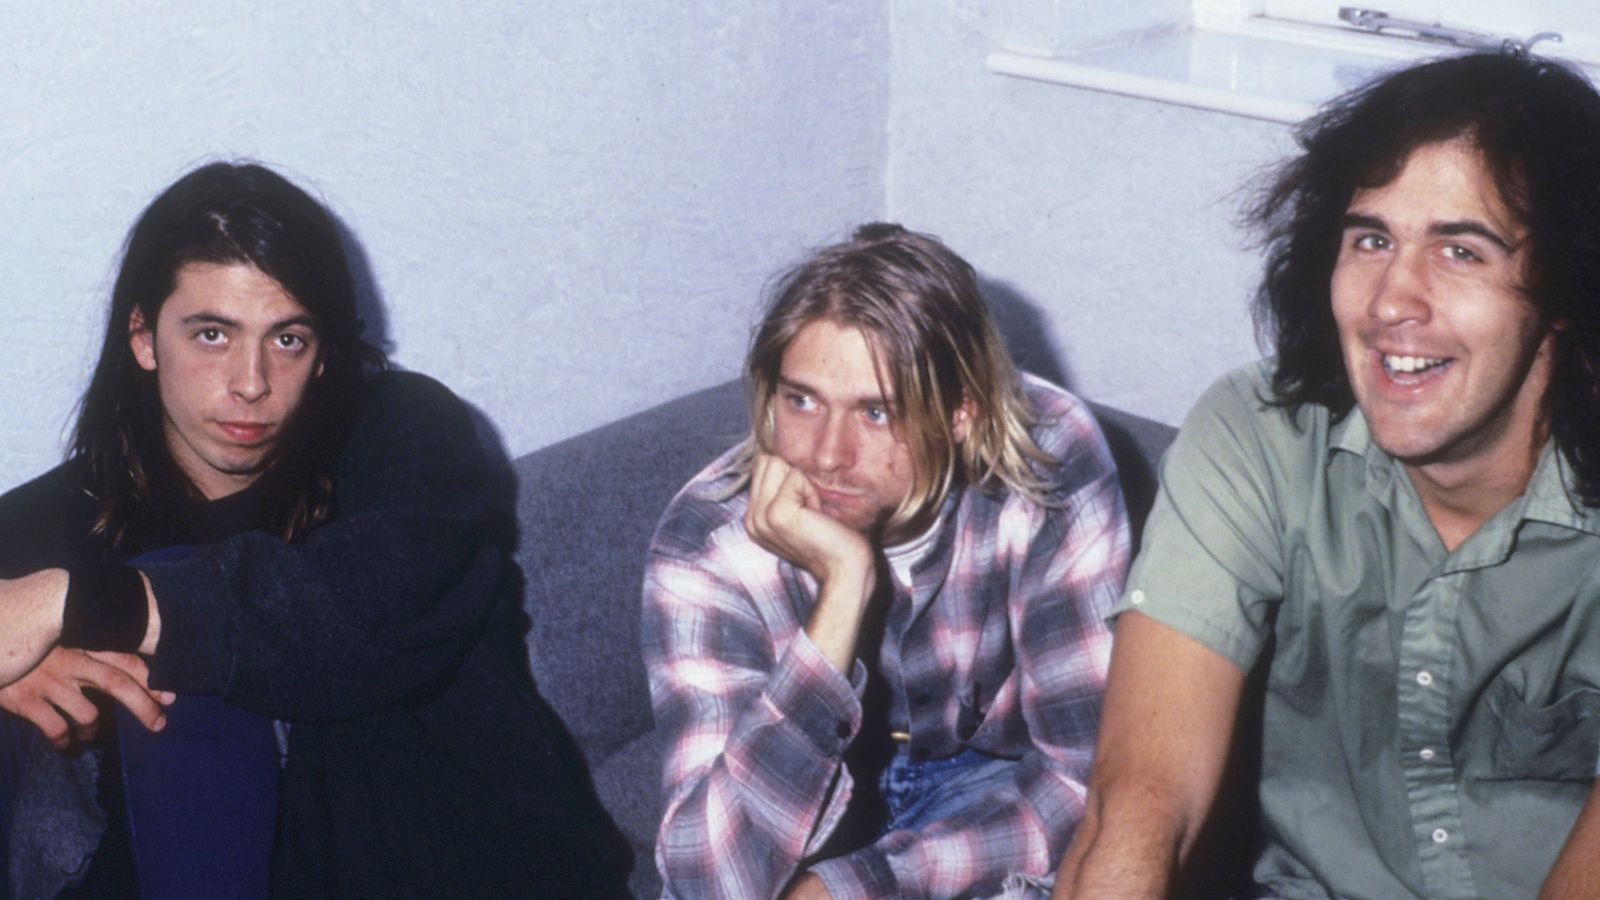 producer of nirvana and pixies albums has died